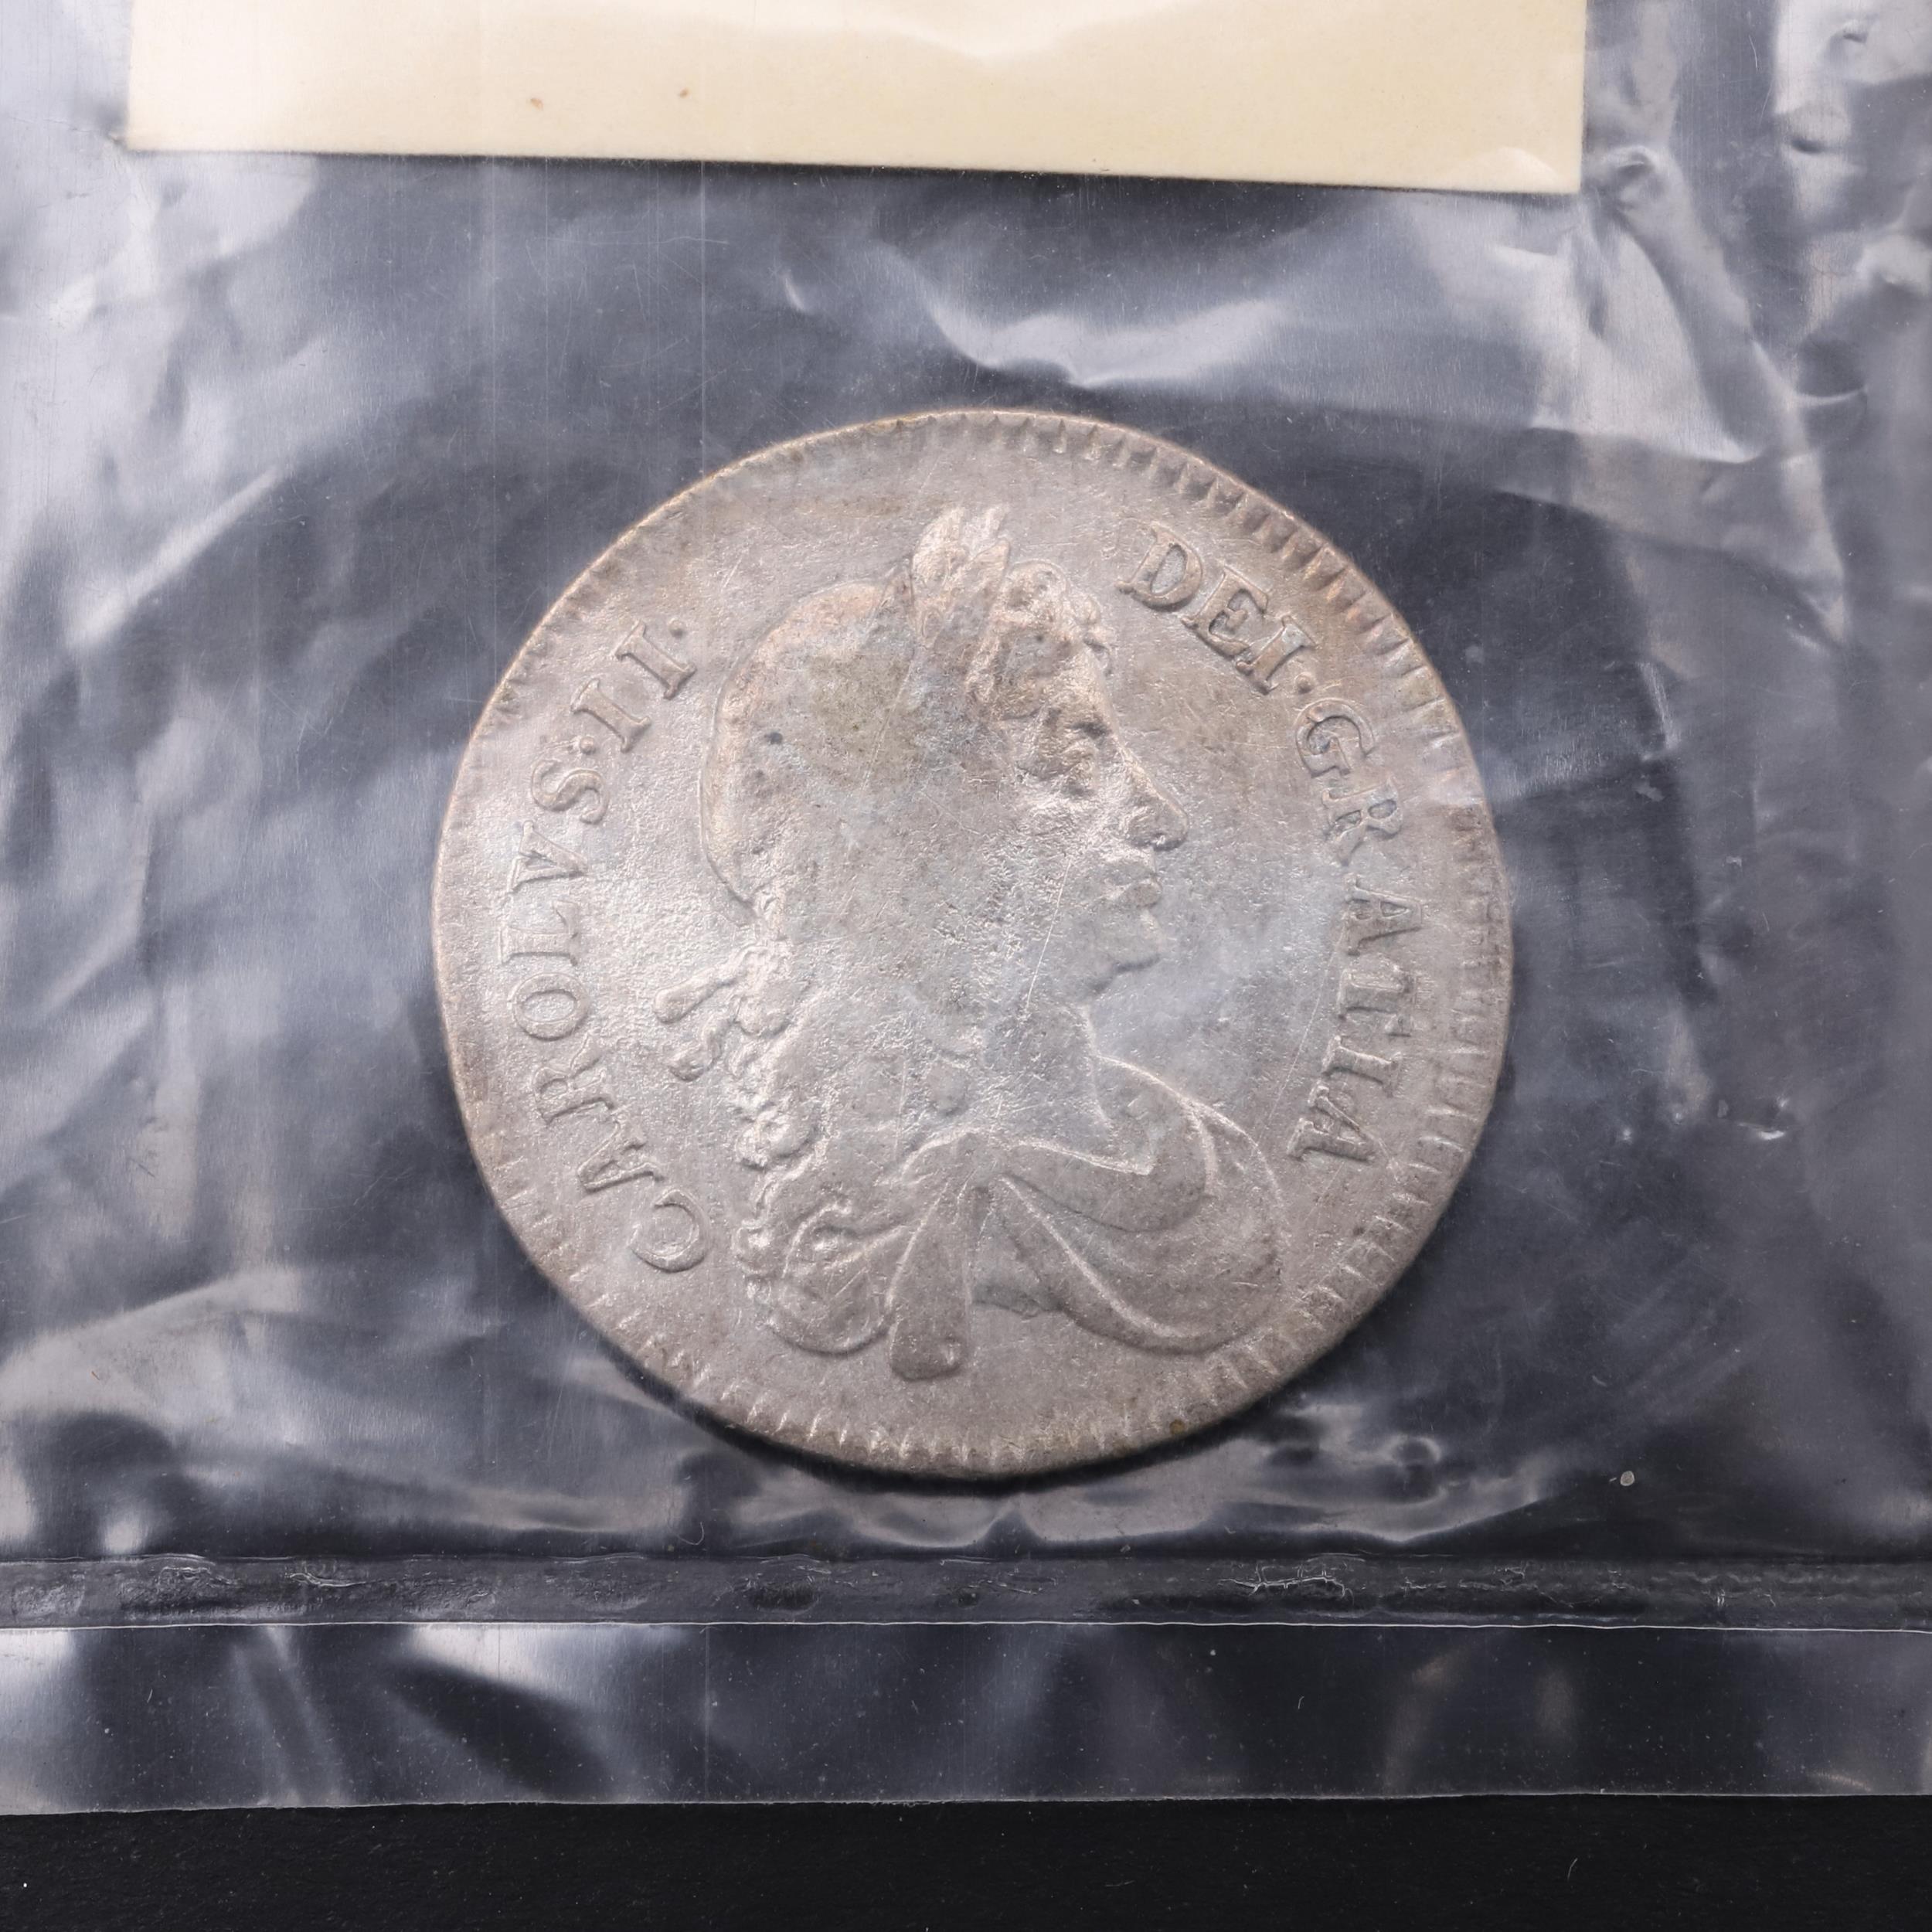 A CHARLES II SHILLING, 1668, FROM THE WRECK OF THE ASSOCIATION.